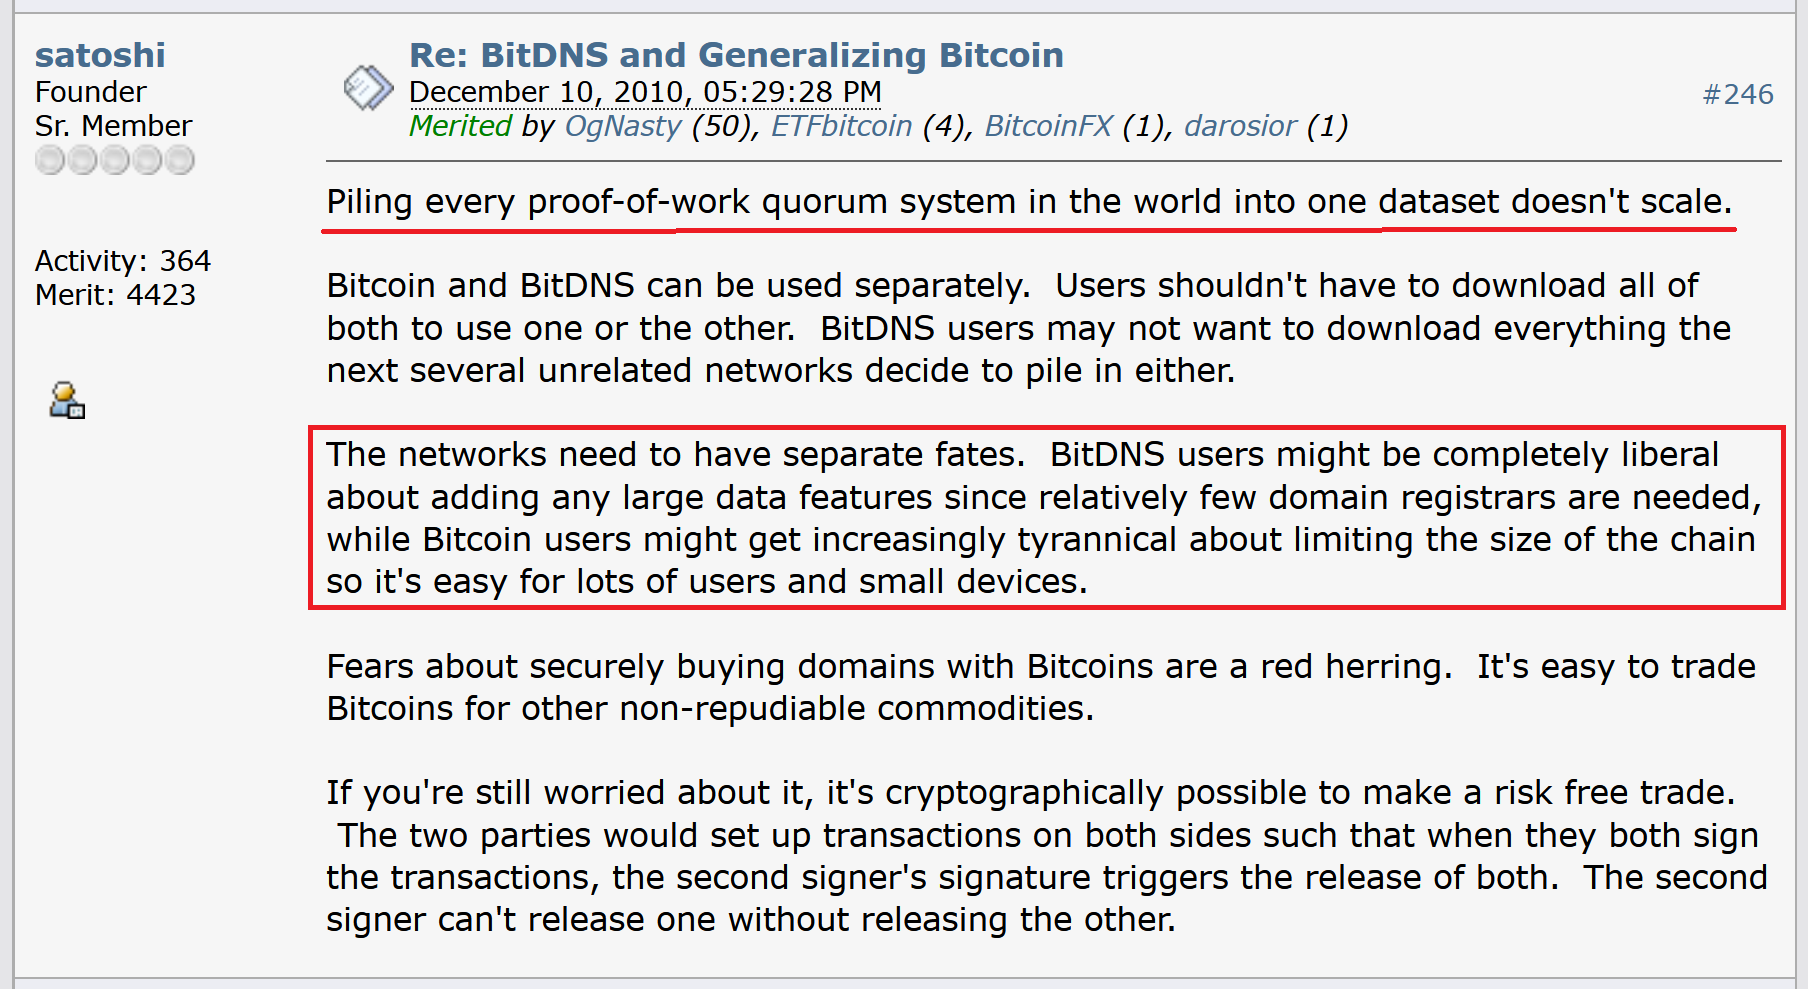 Satoshi's comments about BitDNS